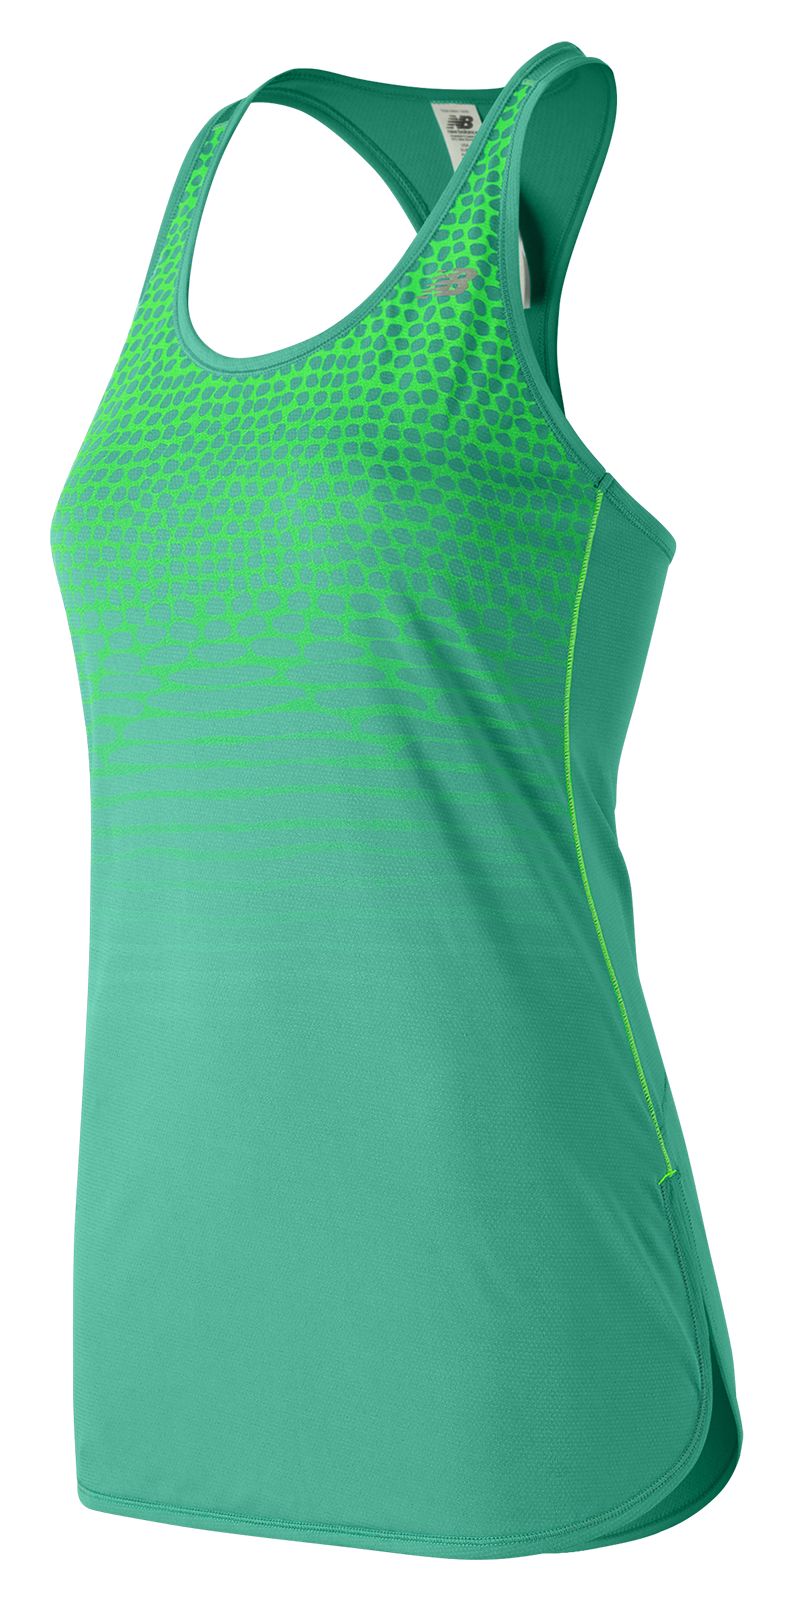 Accelerate Tunic Graphic - Women's 53161 - Tops, Performance - New Balance